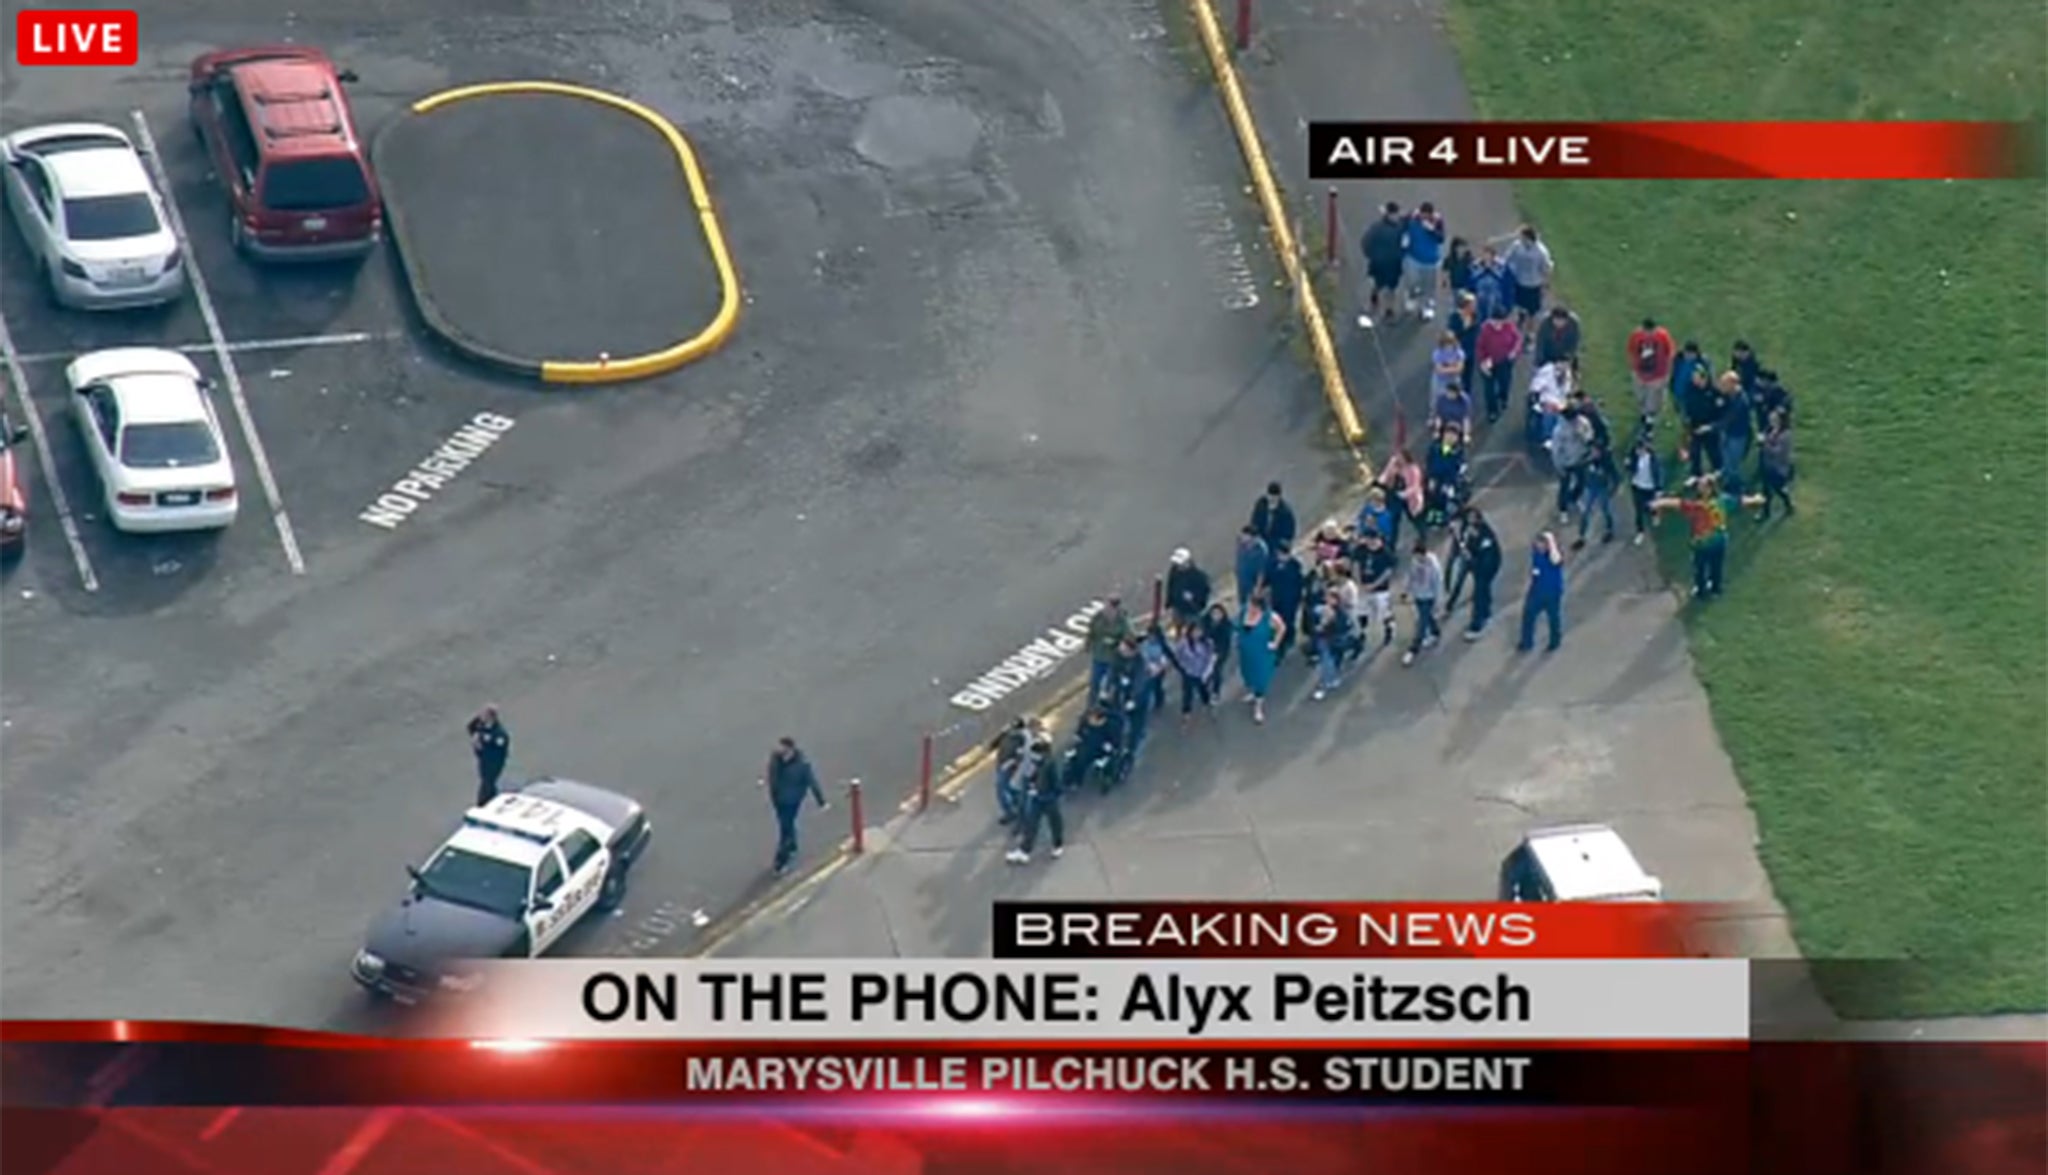 Students are evacuated from the school